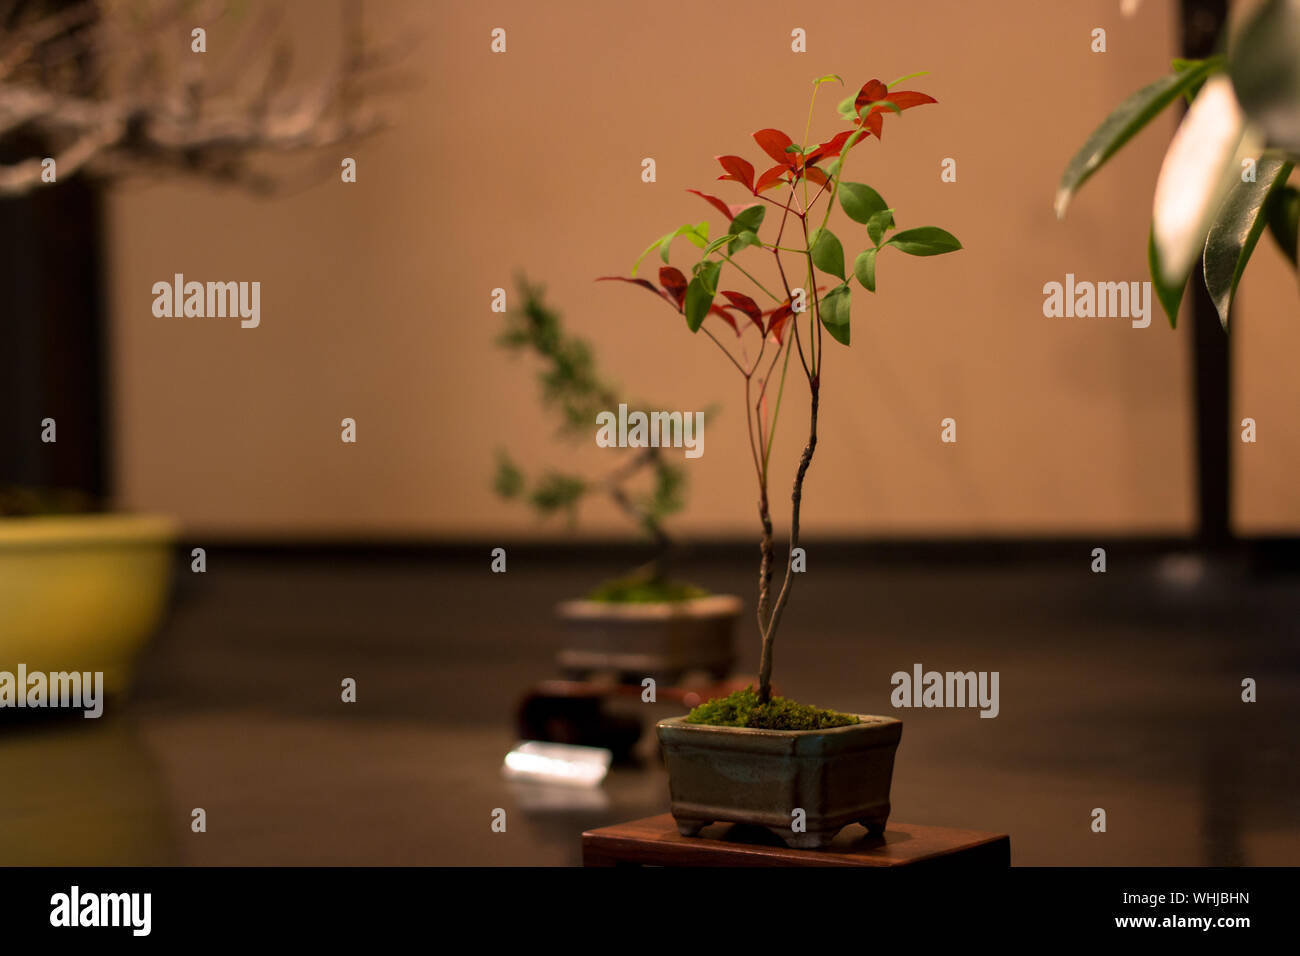 Bonsai Tree Business High Resolution Stock Photography And Images Alamy